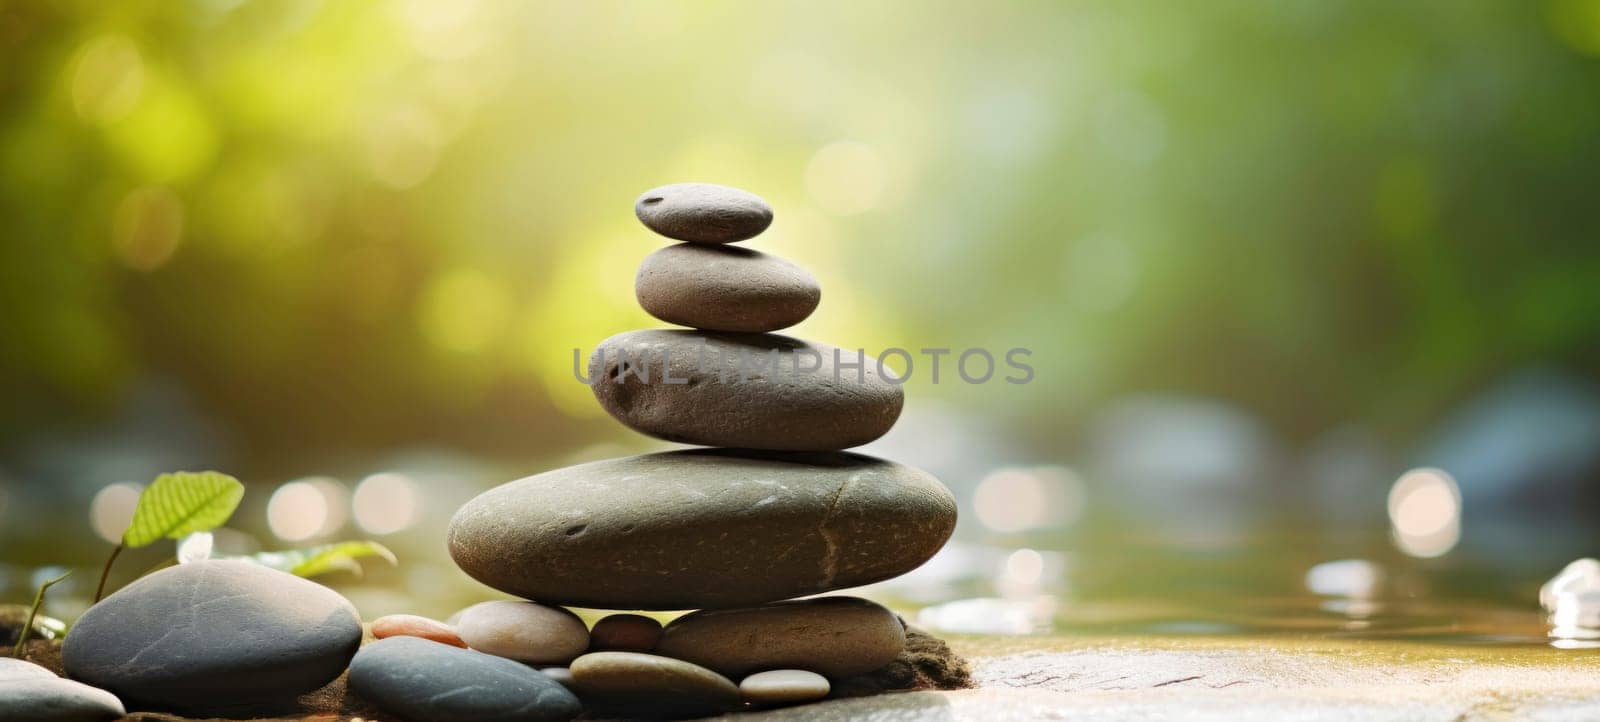 A harmonious stack of smooth river stones in a tranquil natural setting, with a soft focus on a green, sunlit background, evoking a sense of balance and calm.